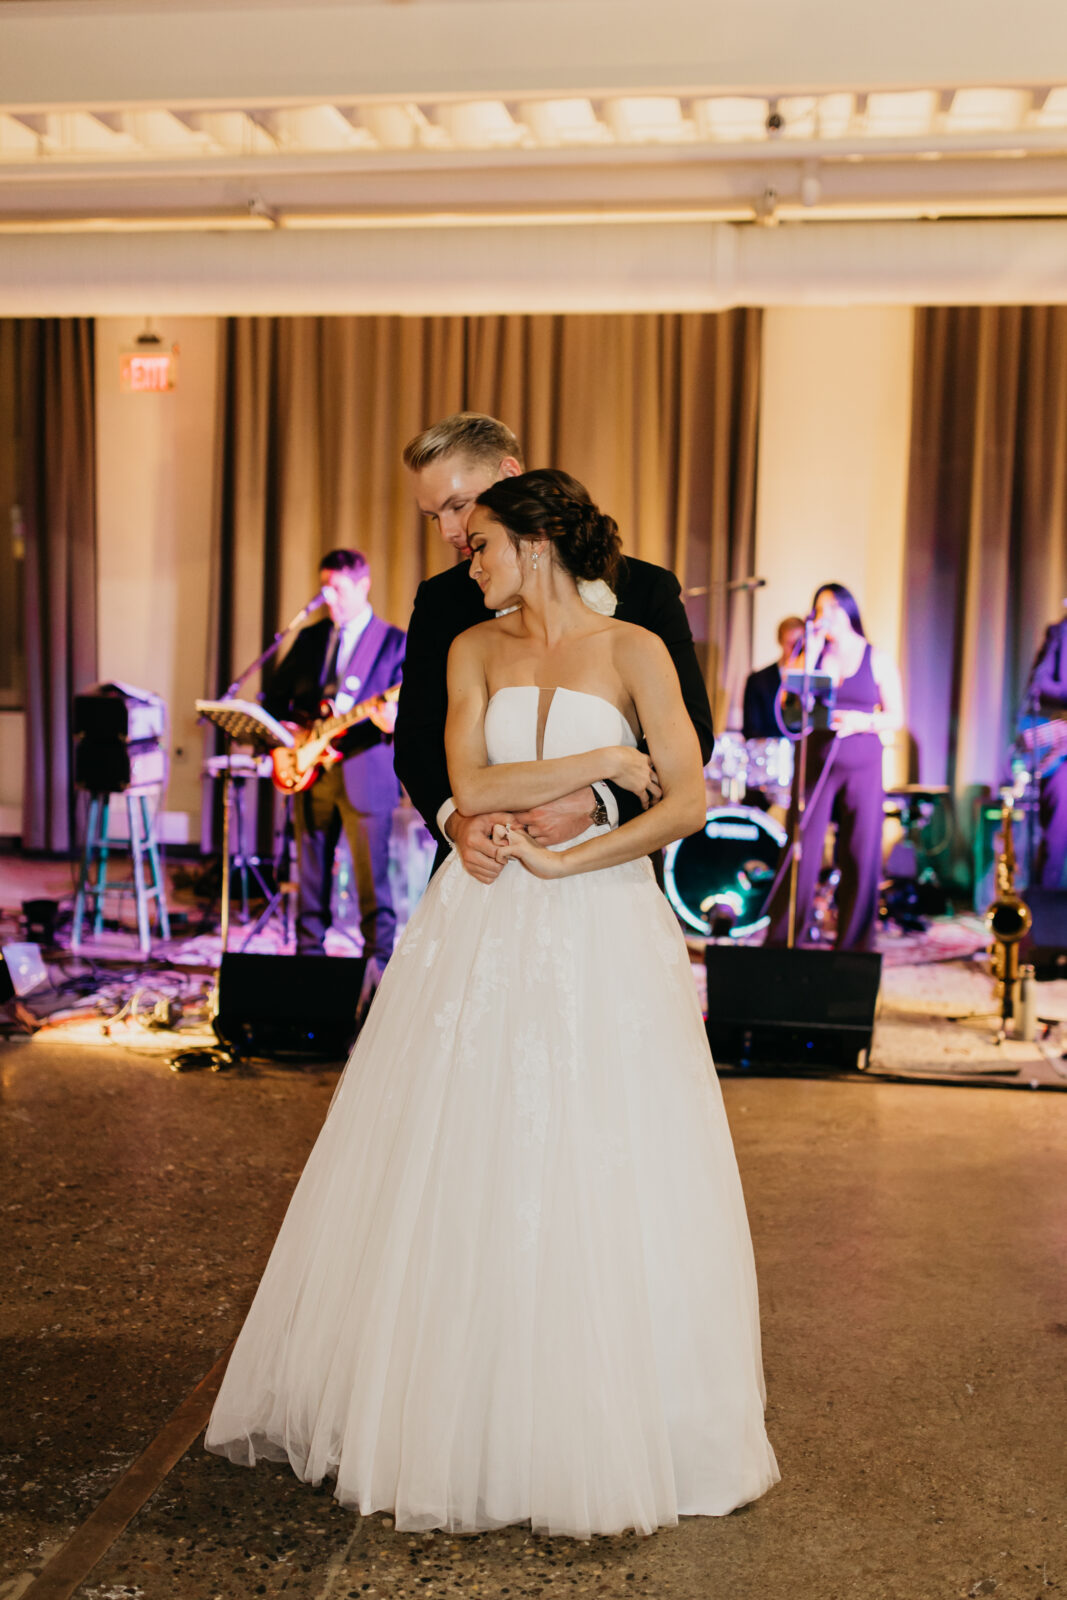 A photo of the newlyweds' first dance as a married couple.